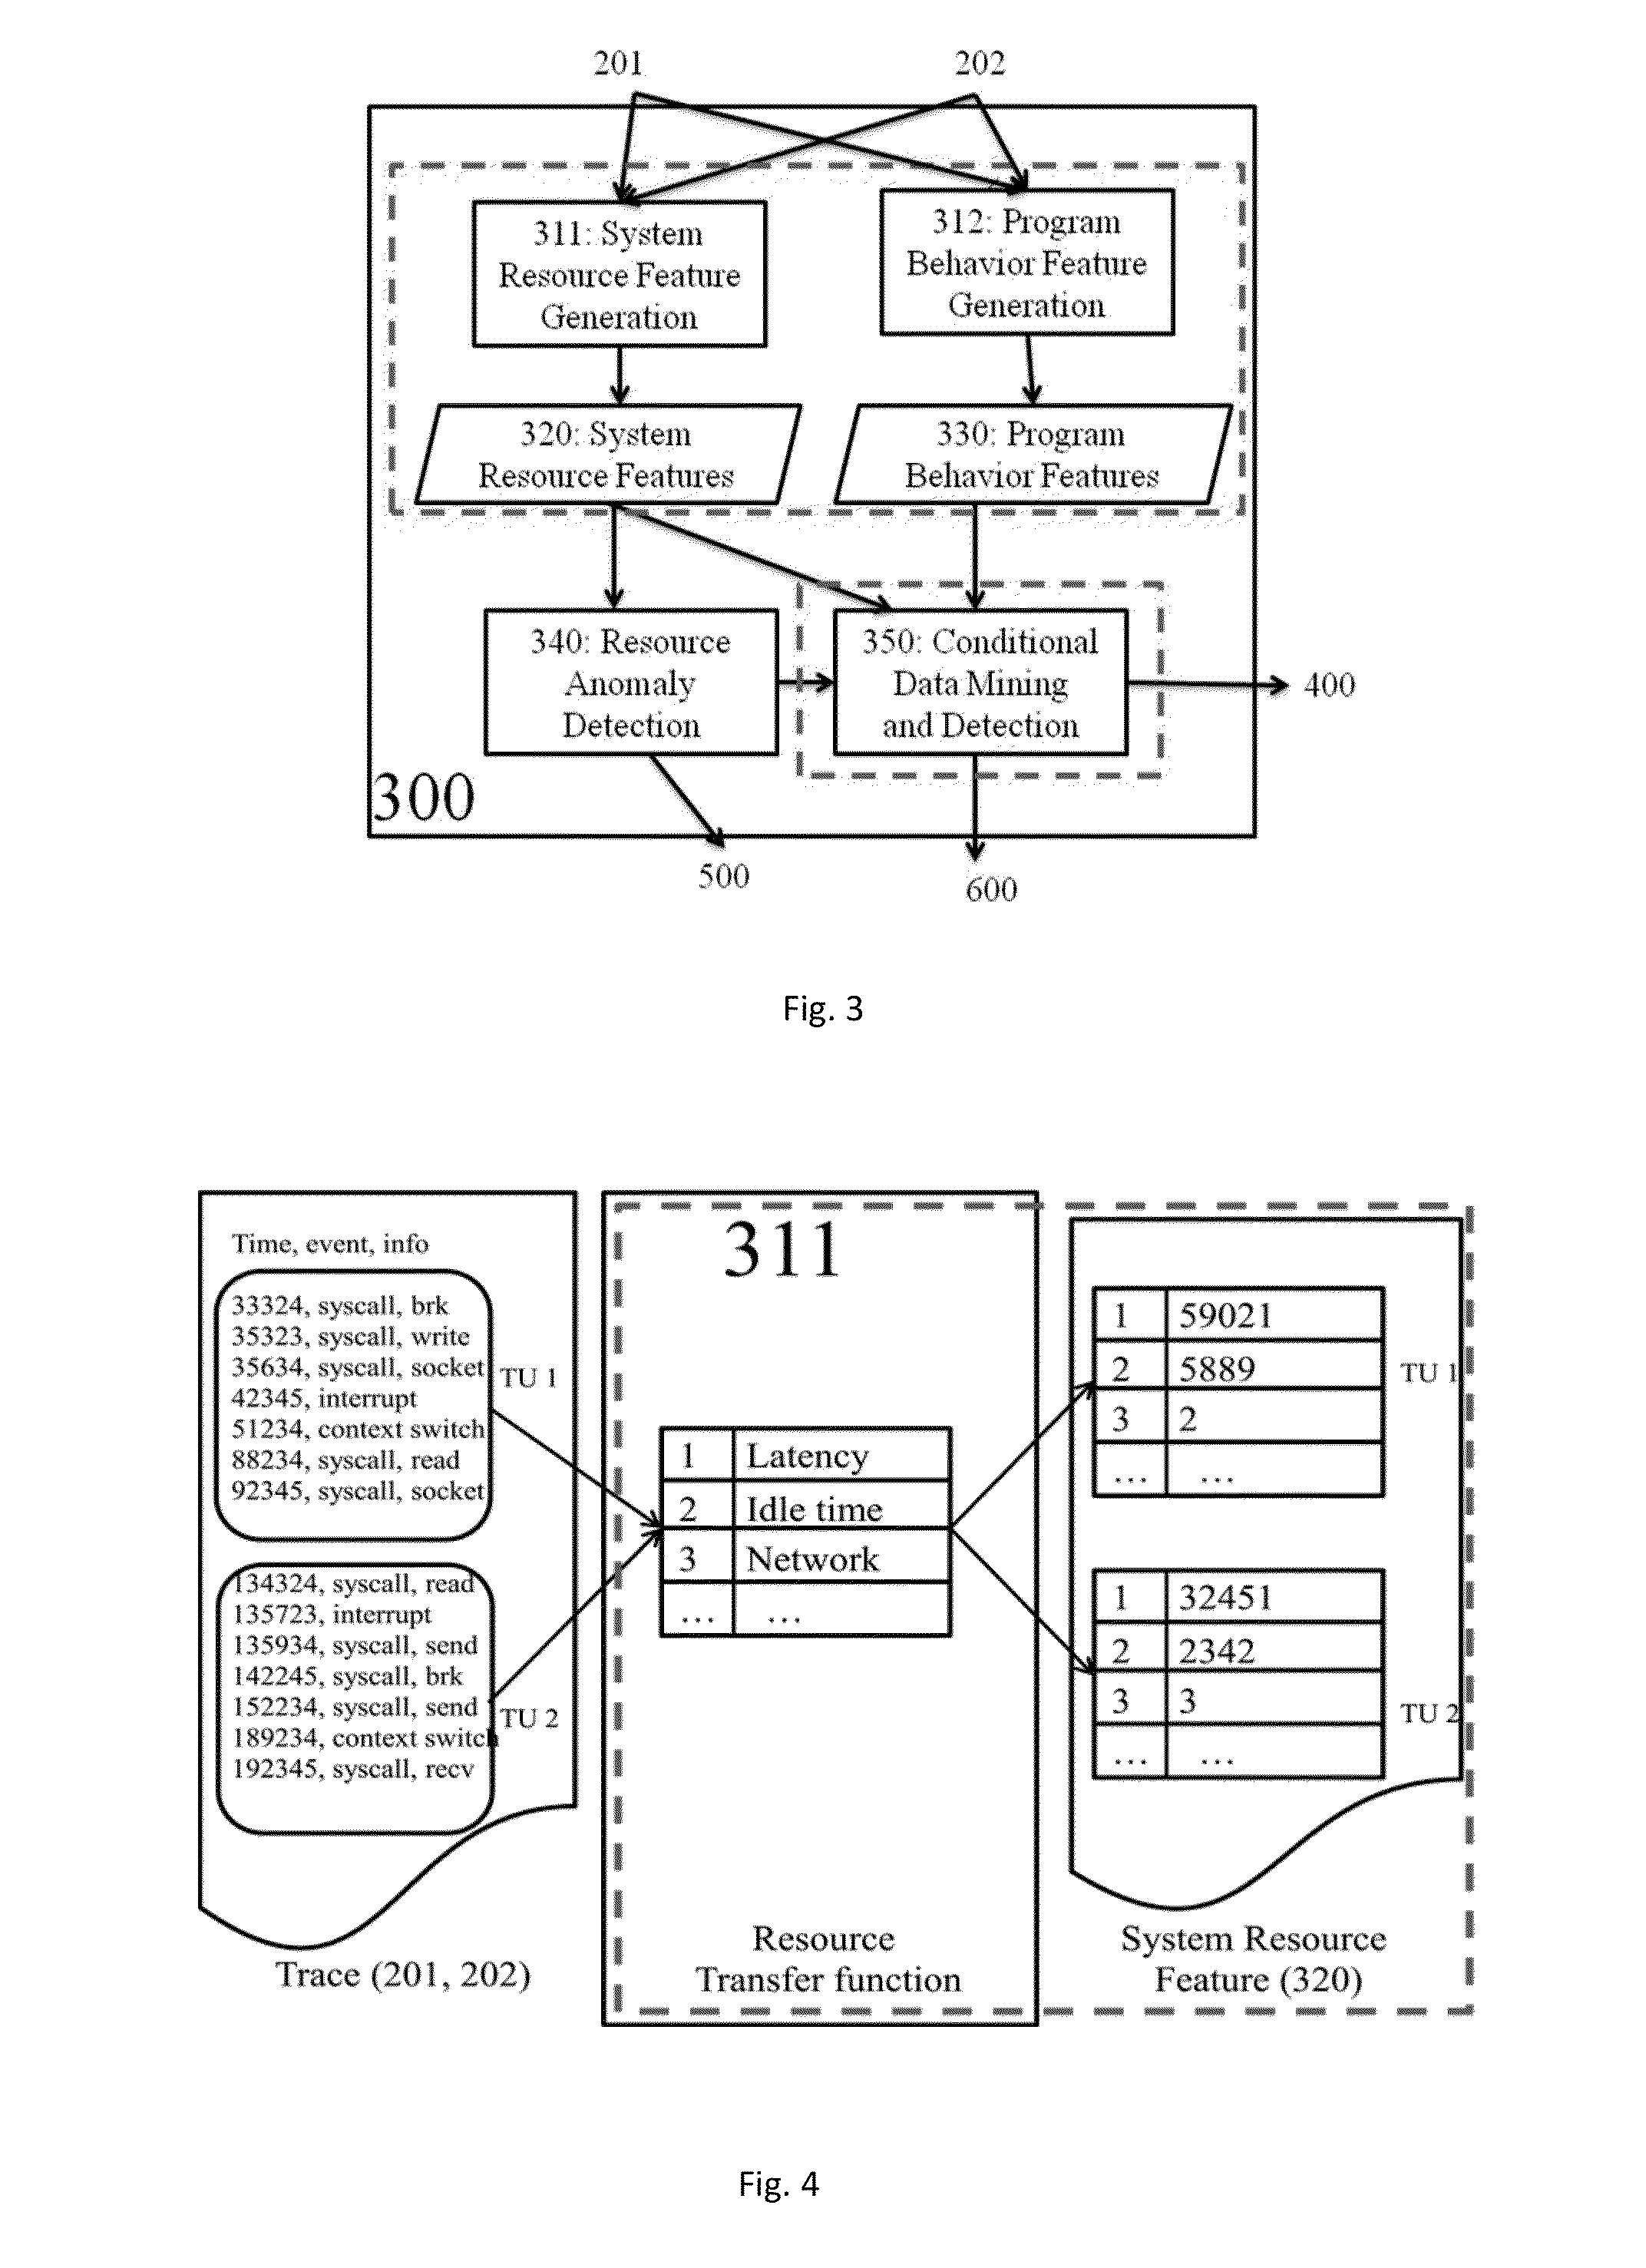 Method and System for Software System Performance Diagnosis with Kernel Event Feature Guidance